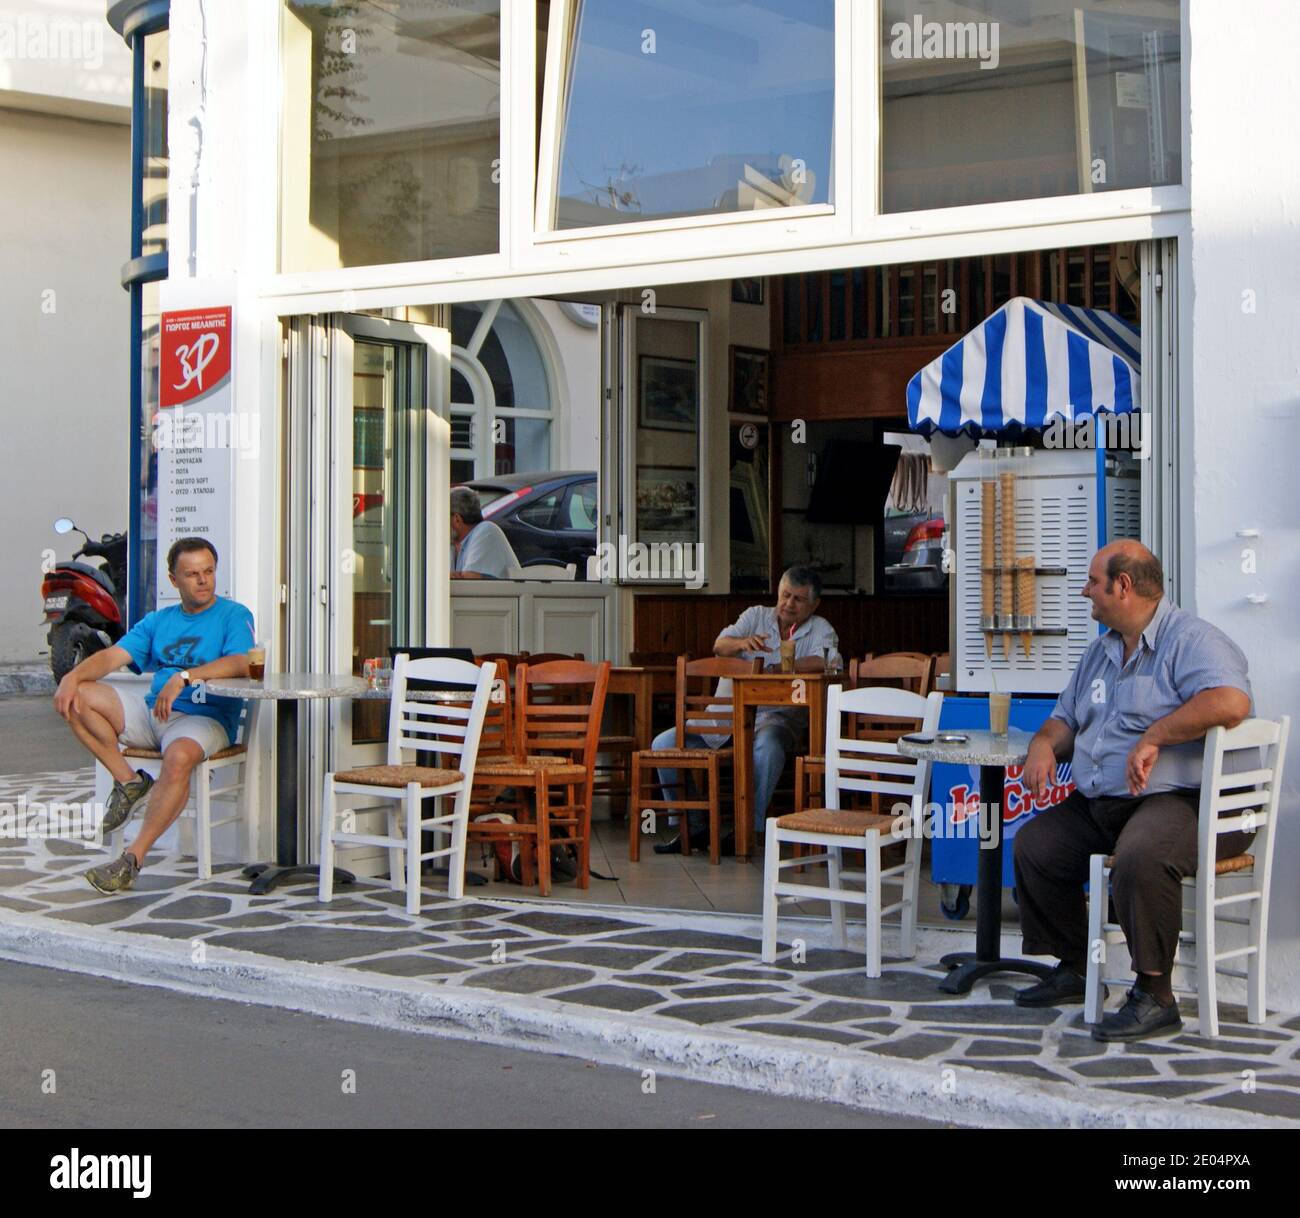 Men sit inside and outside a Greek cafe in Naxos, Greece. Stock Photo